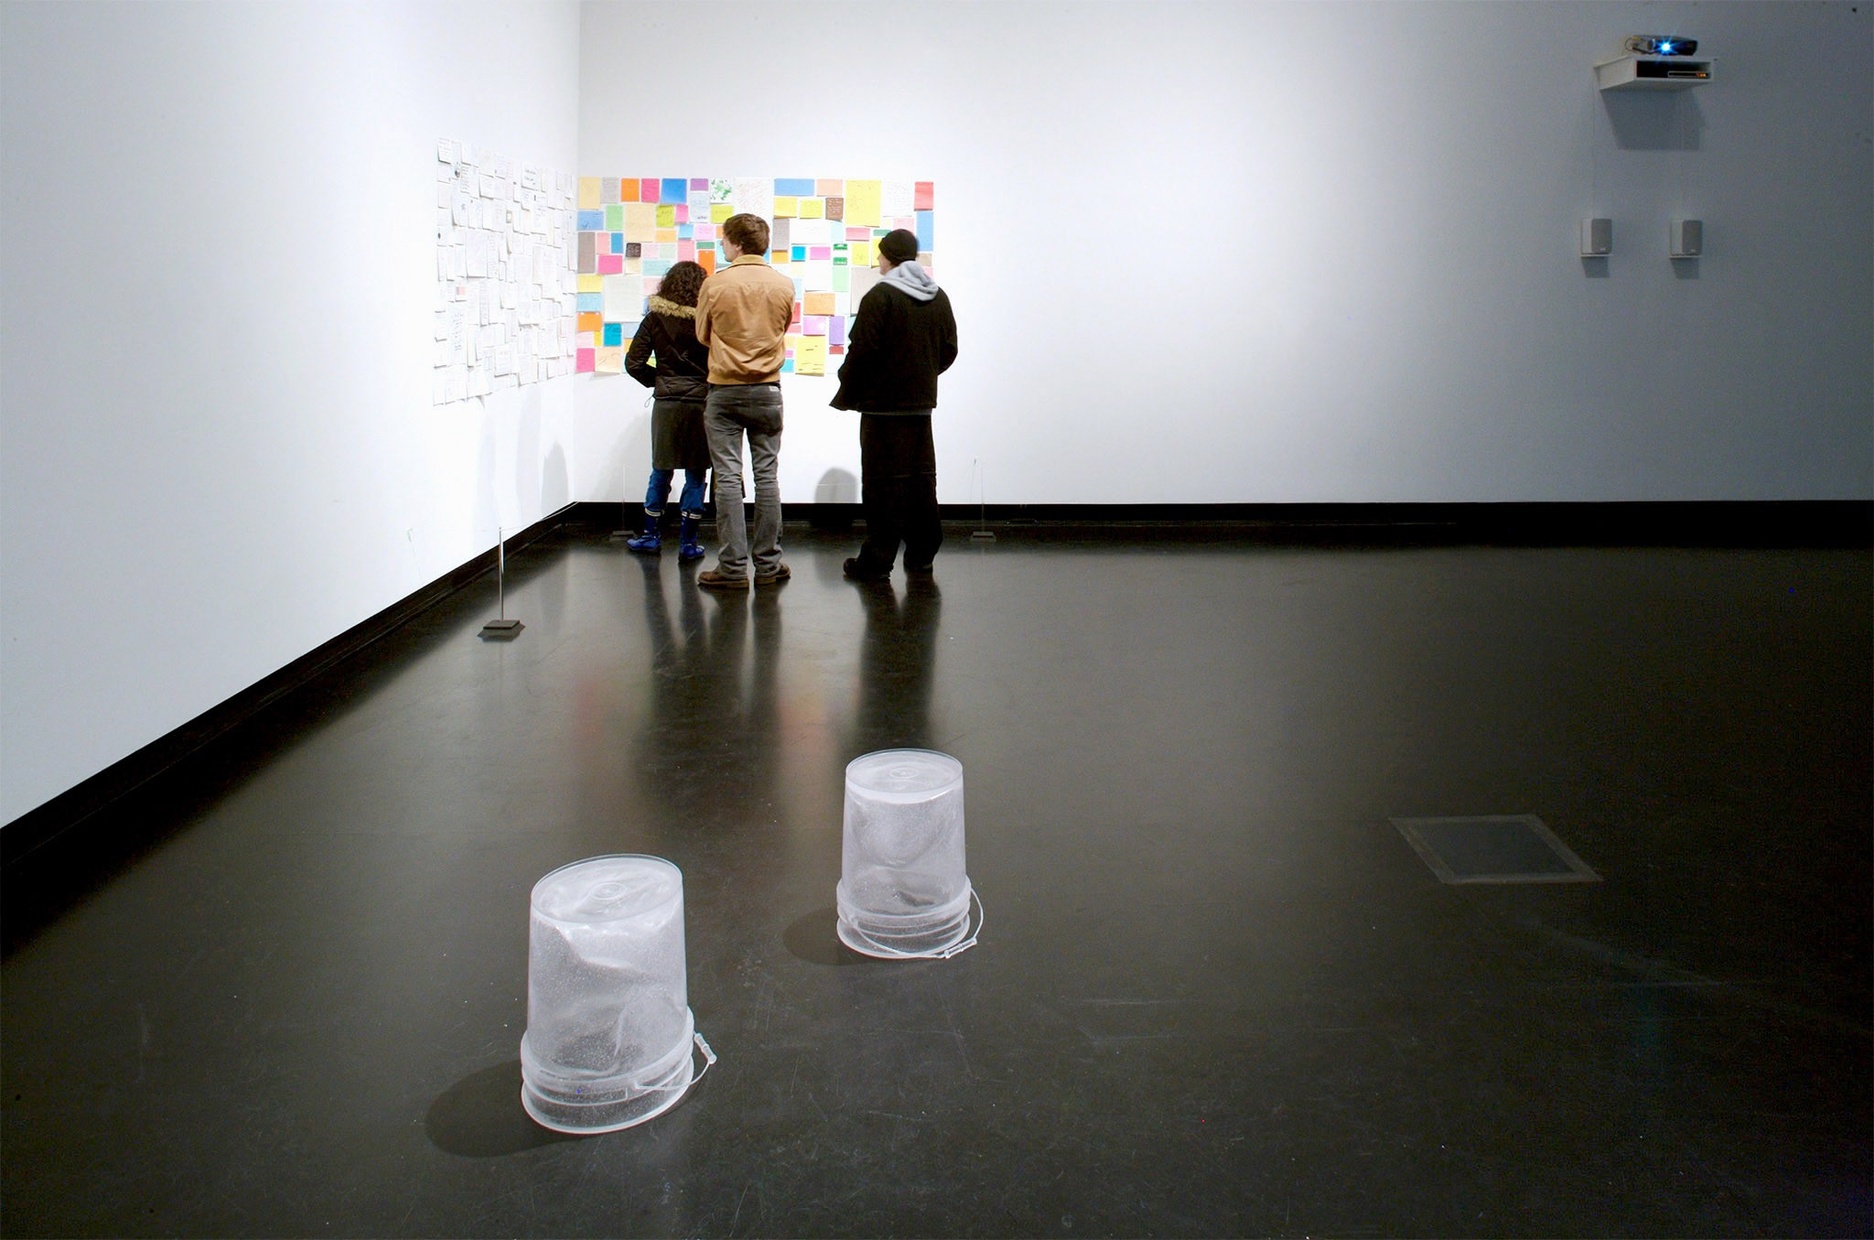 A group of three people stand looking at an artwork hanging on a white wall made of different colored, different sized squares and rectangles. On the floor in front of them, two clear garbage pails rest upside-down.